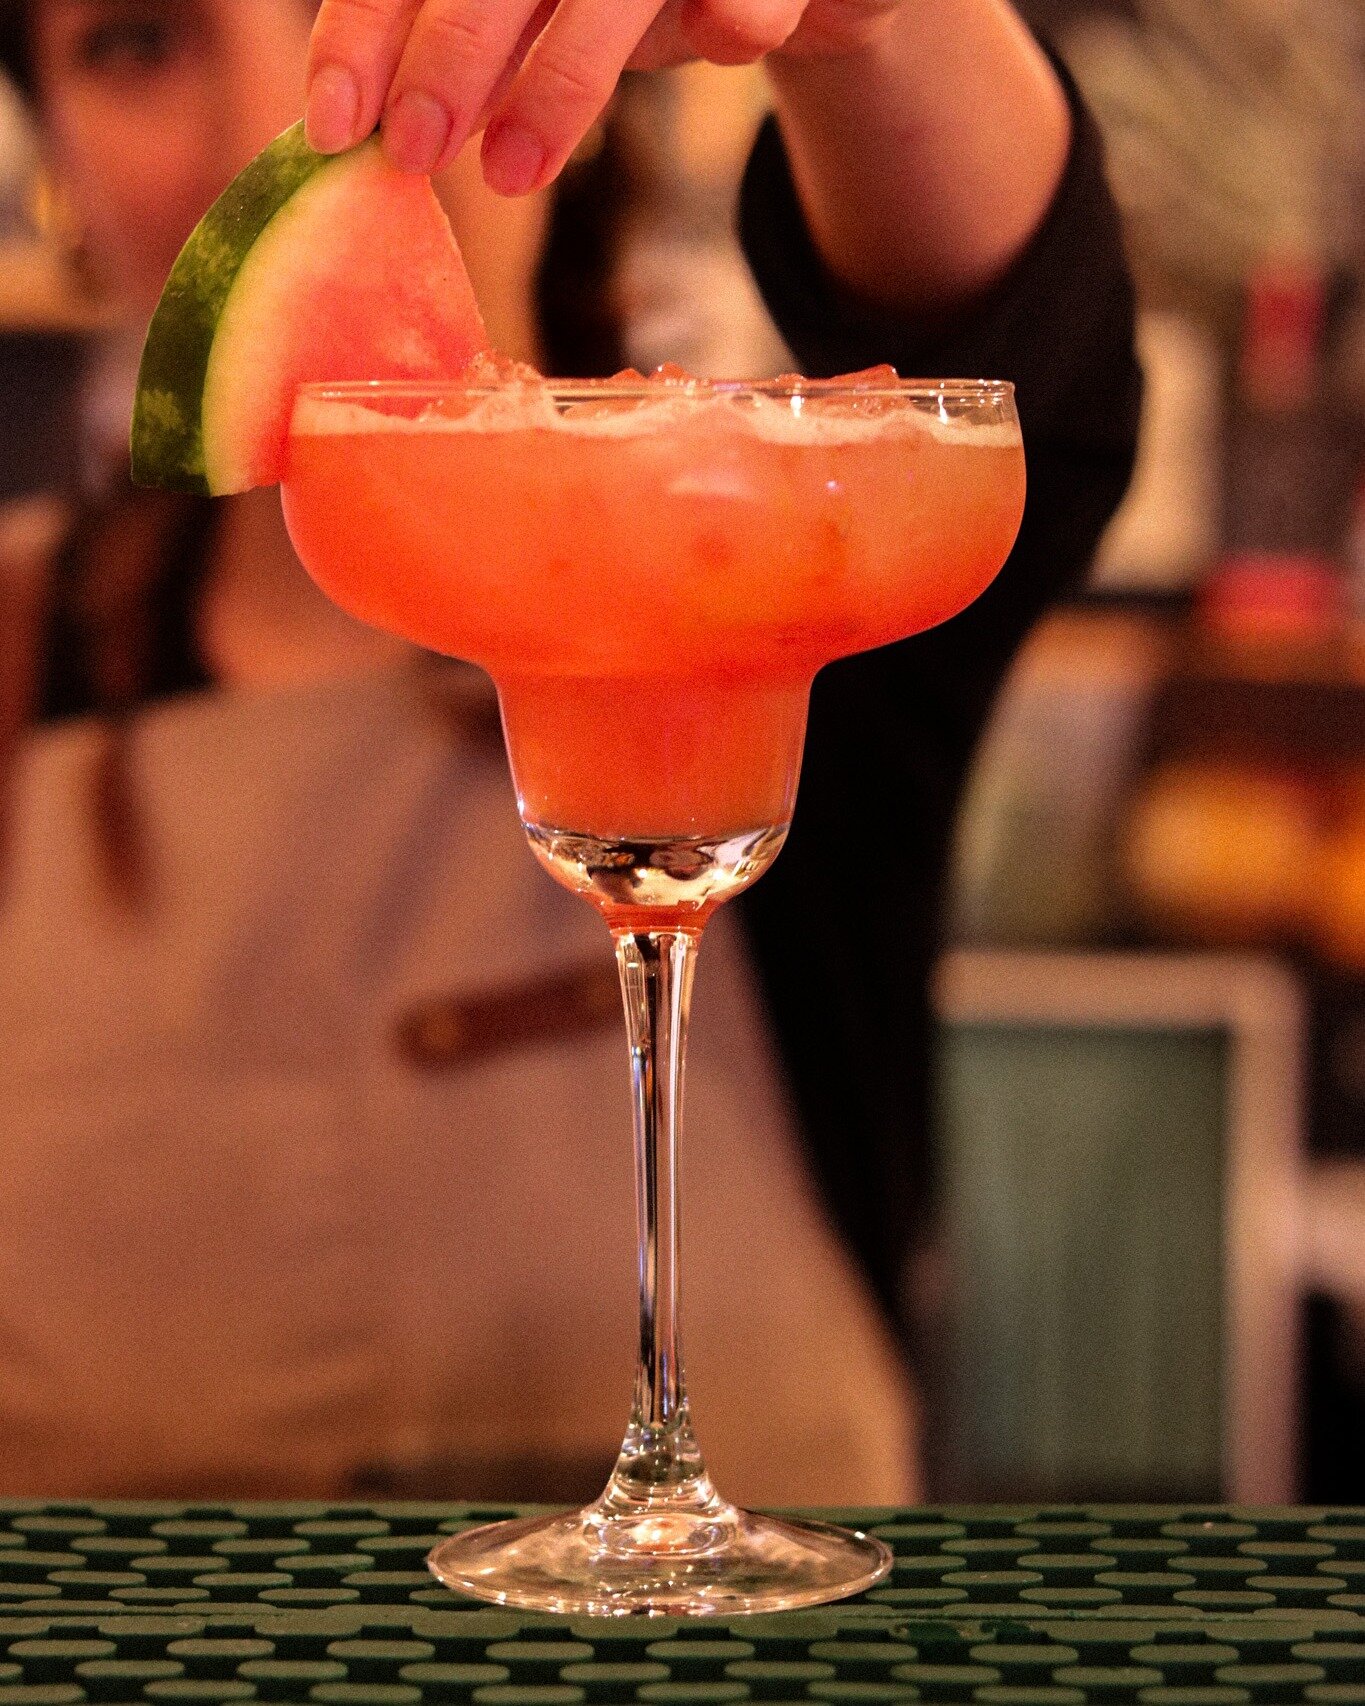 Ready to get SMASHED with flavor? 🍉🍹 Say hello to our Sandia Smash Margarita - the ultimate fiesta starter at Original's Mexicano! Made with Tequila blanco, elderflower liqueur, fresh watermelon press, and a squeeze of lime, it's like a party in ev